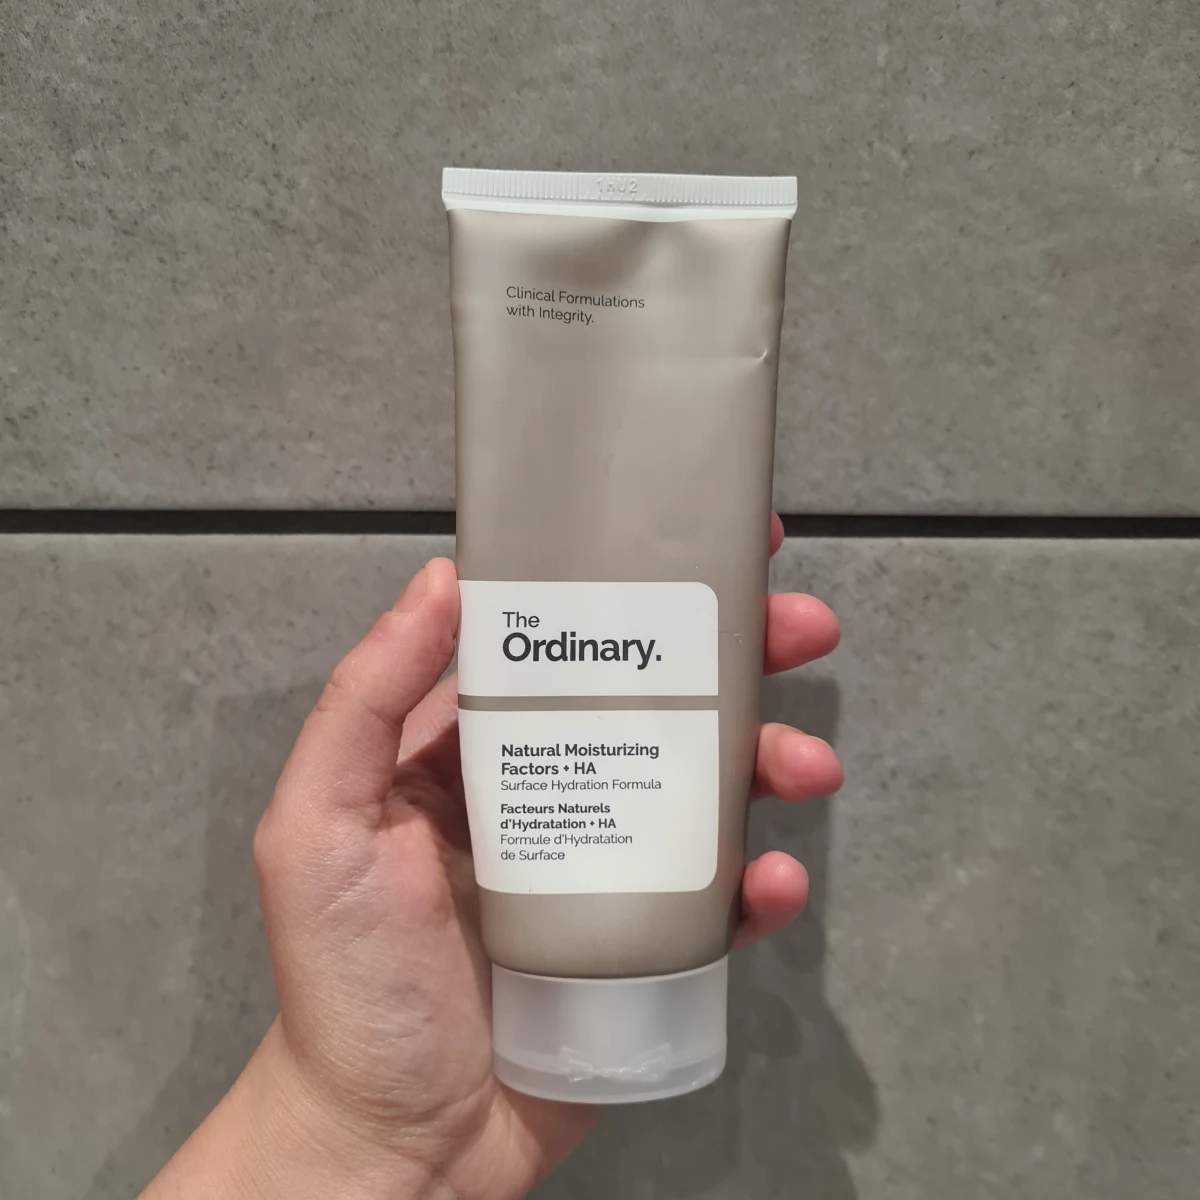 The Ordinary Hydration Natural Moisturizing Factors + HA - review image